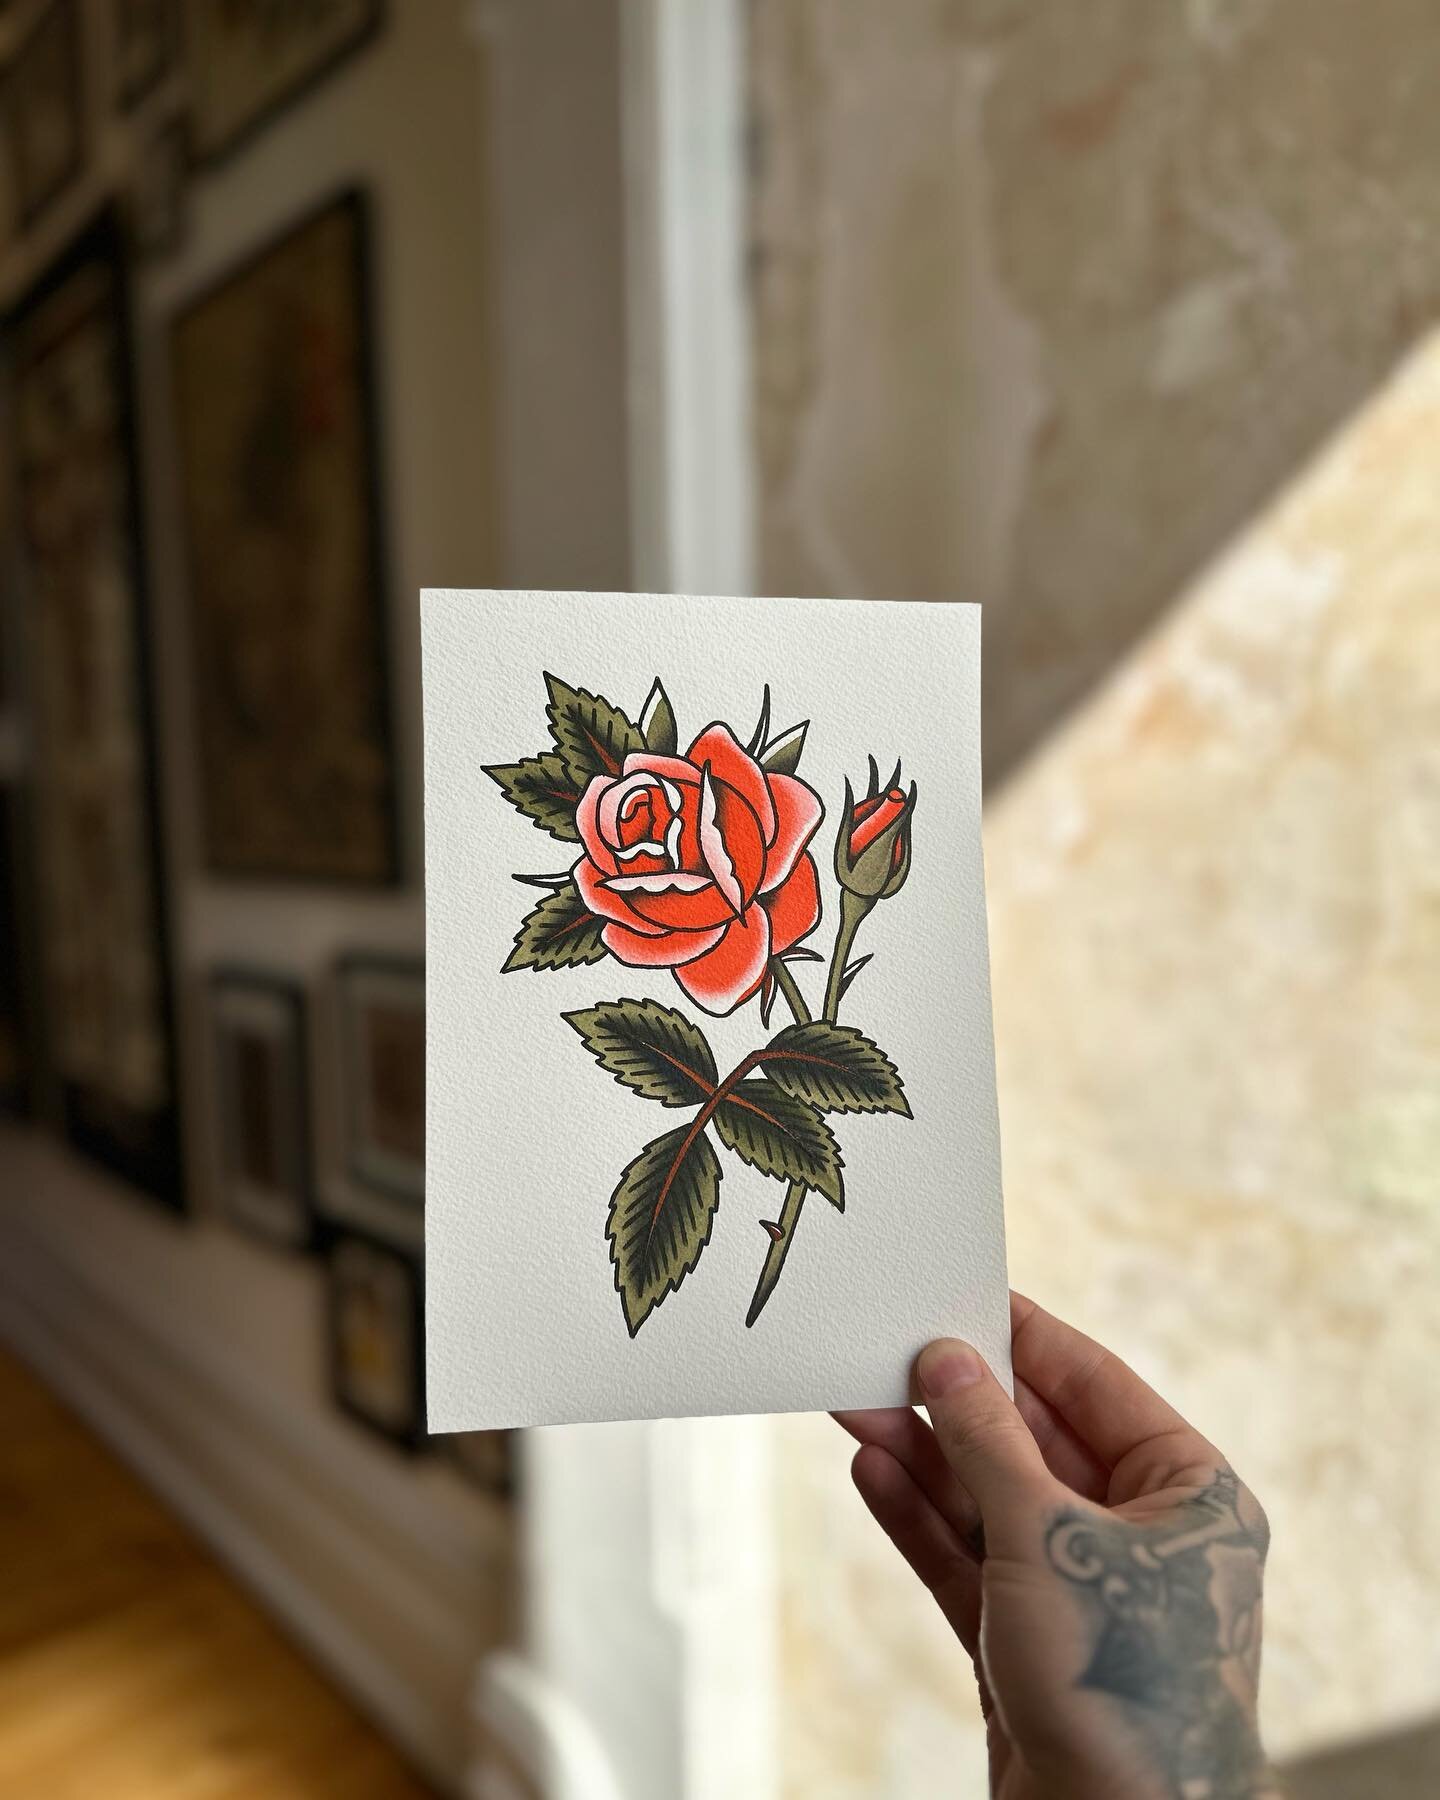 🍂 This little A5 painting is available to purchase on my web-store! I&rsquo;d also be super stoked to tattoo this one🌹
⠀⠀⠀⠀⠀⠀⠀
✉️ For all bookings and enquiries please email justintattoo28@gmail.com🌹